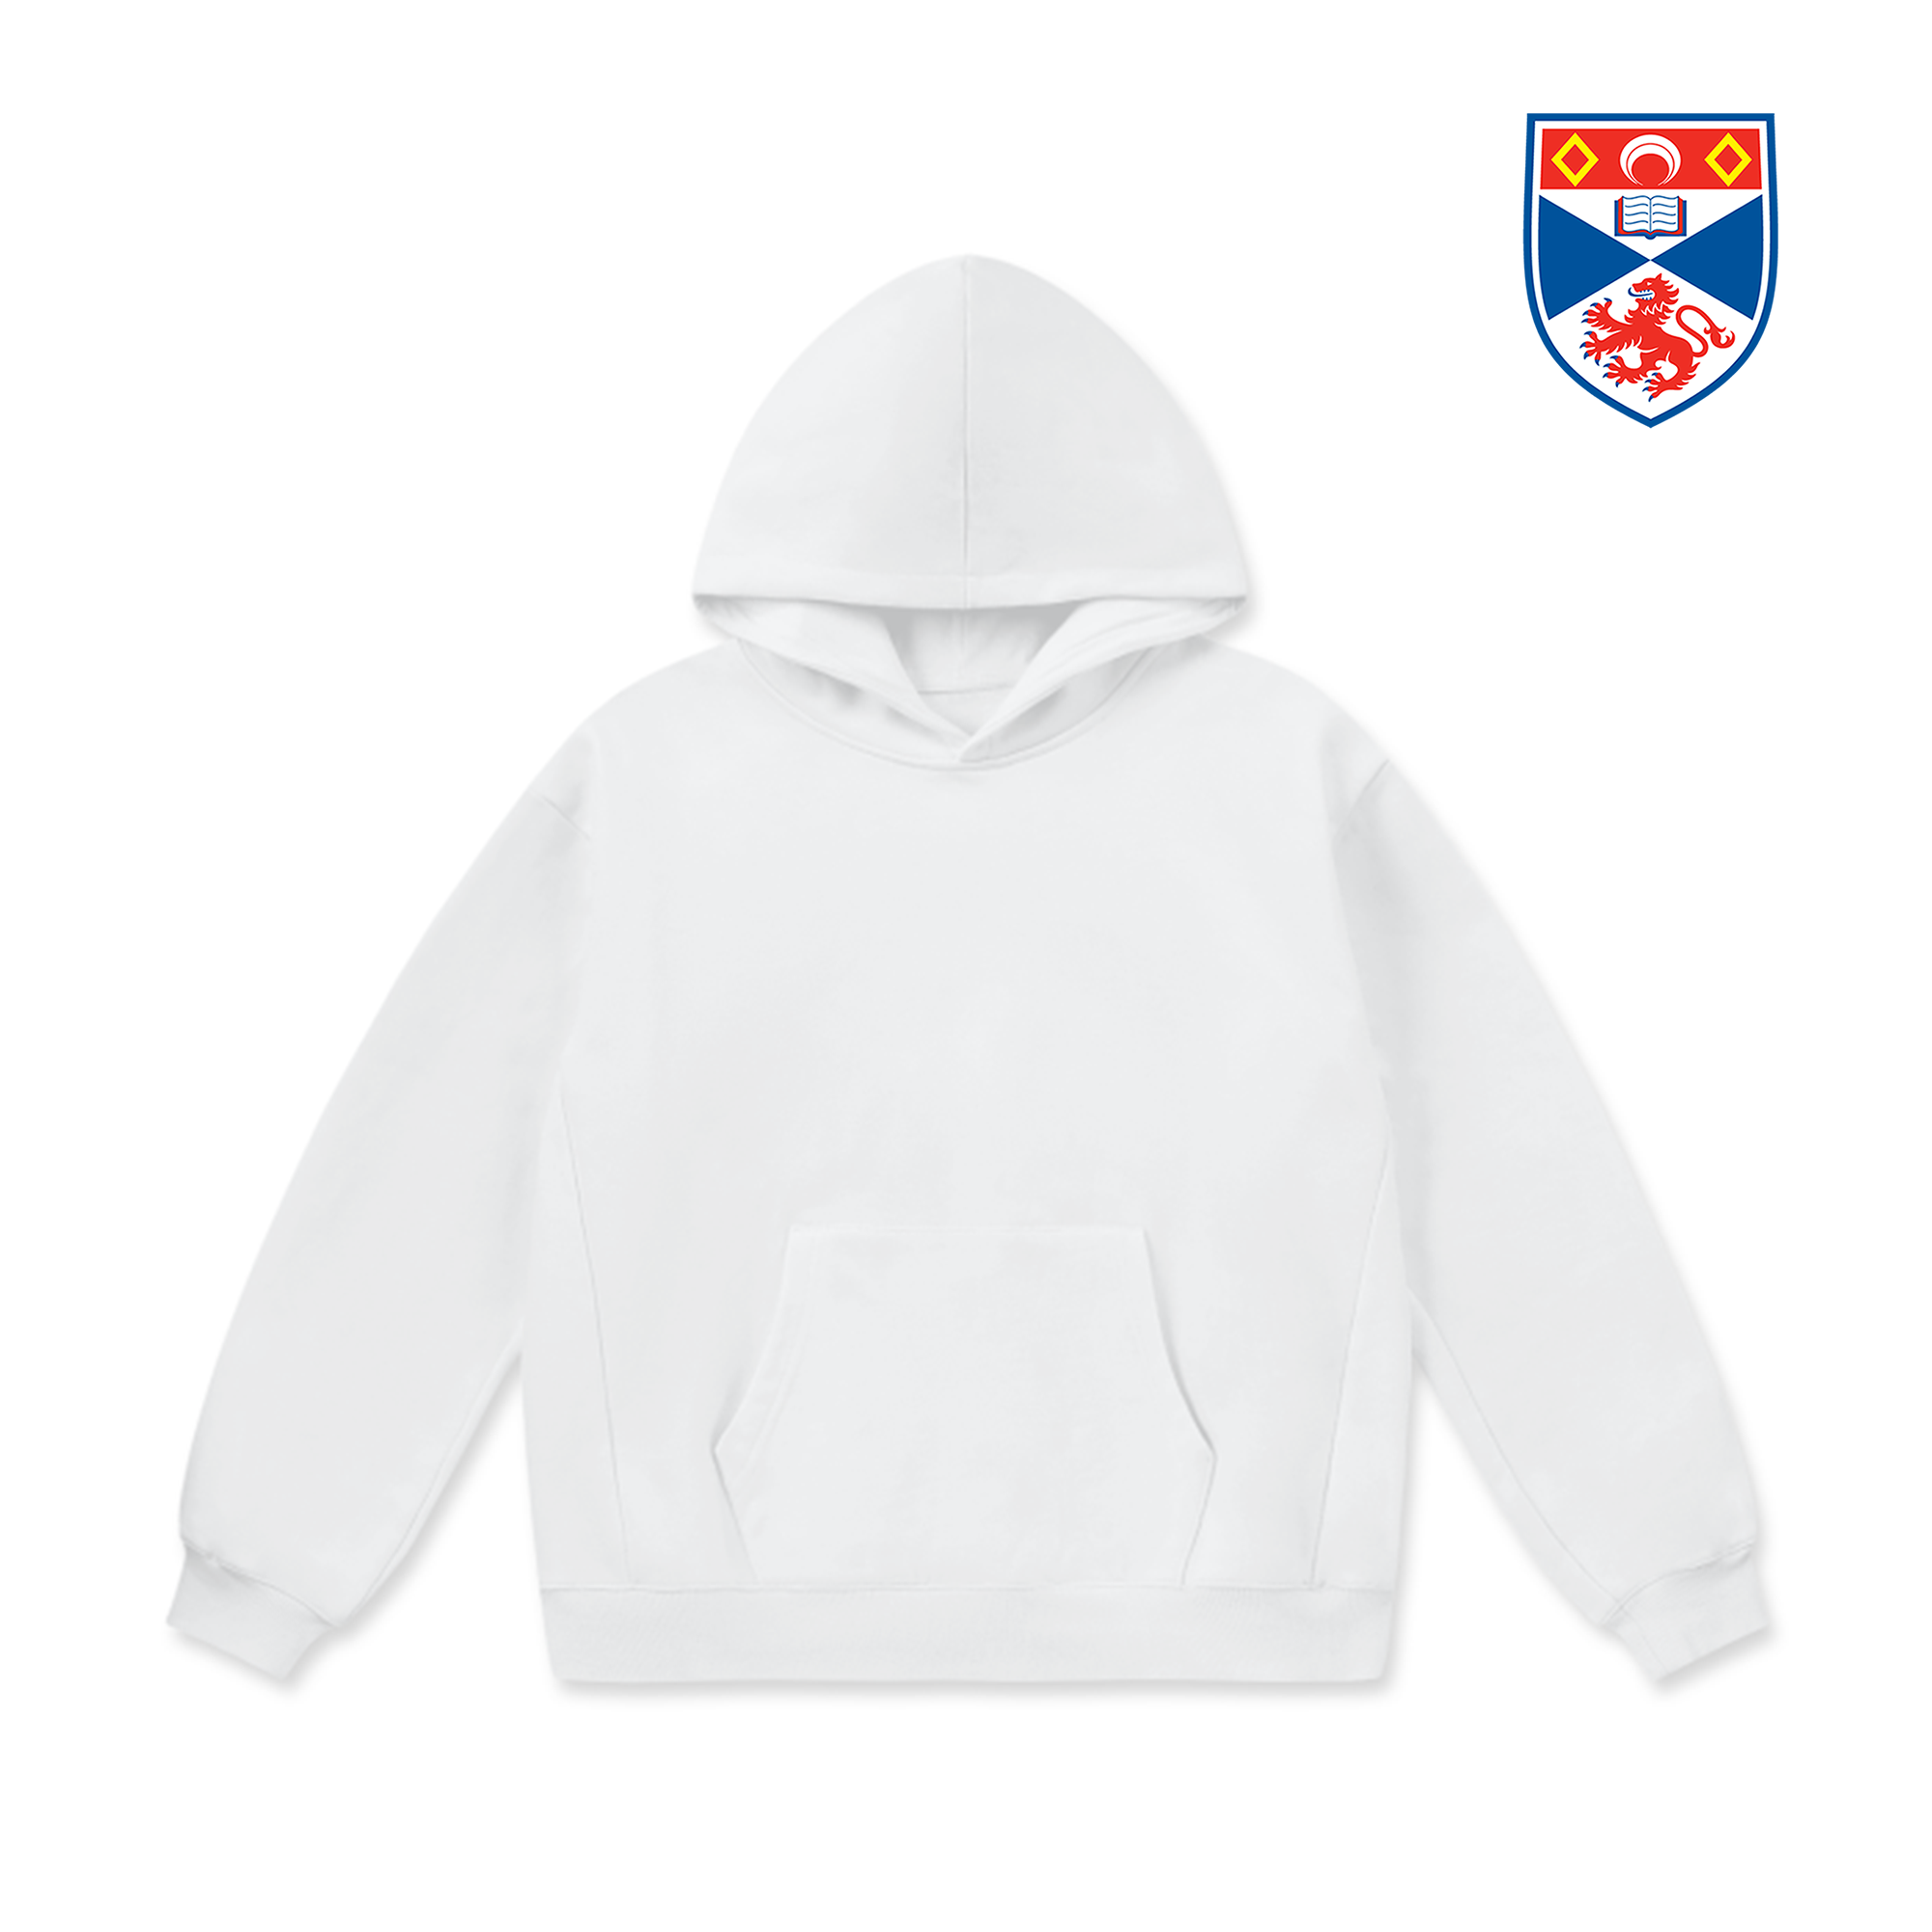 LCC Super Weighted Hoodie - St Andrews University (Classic)